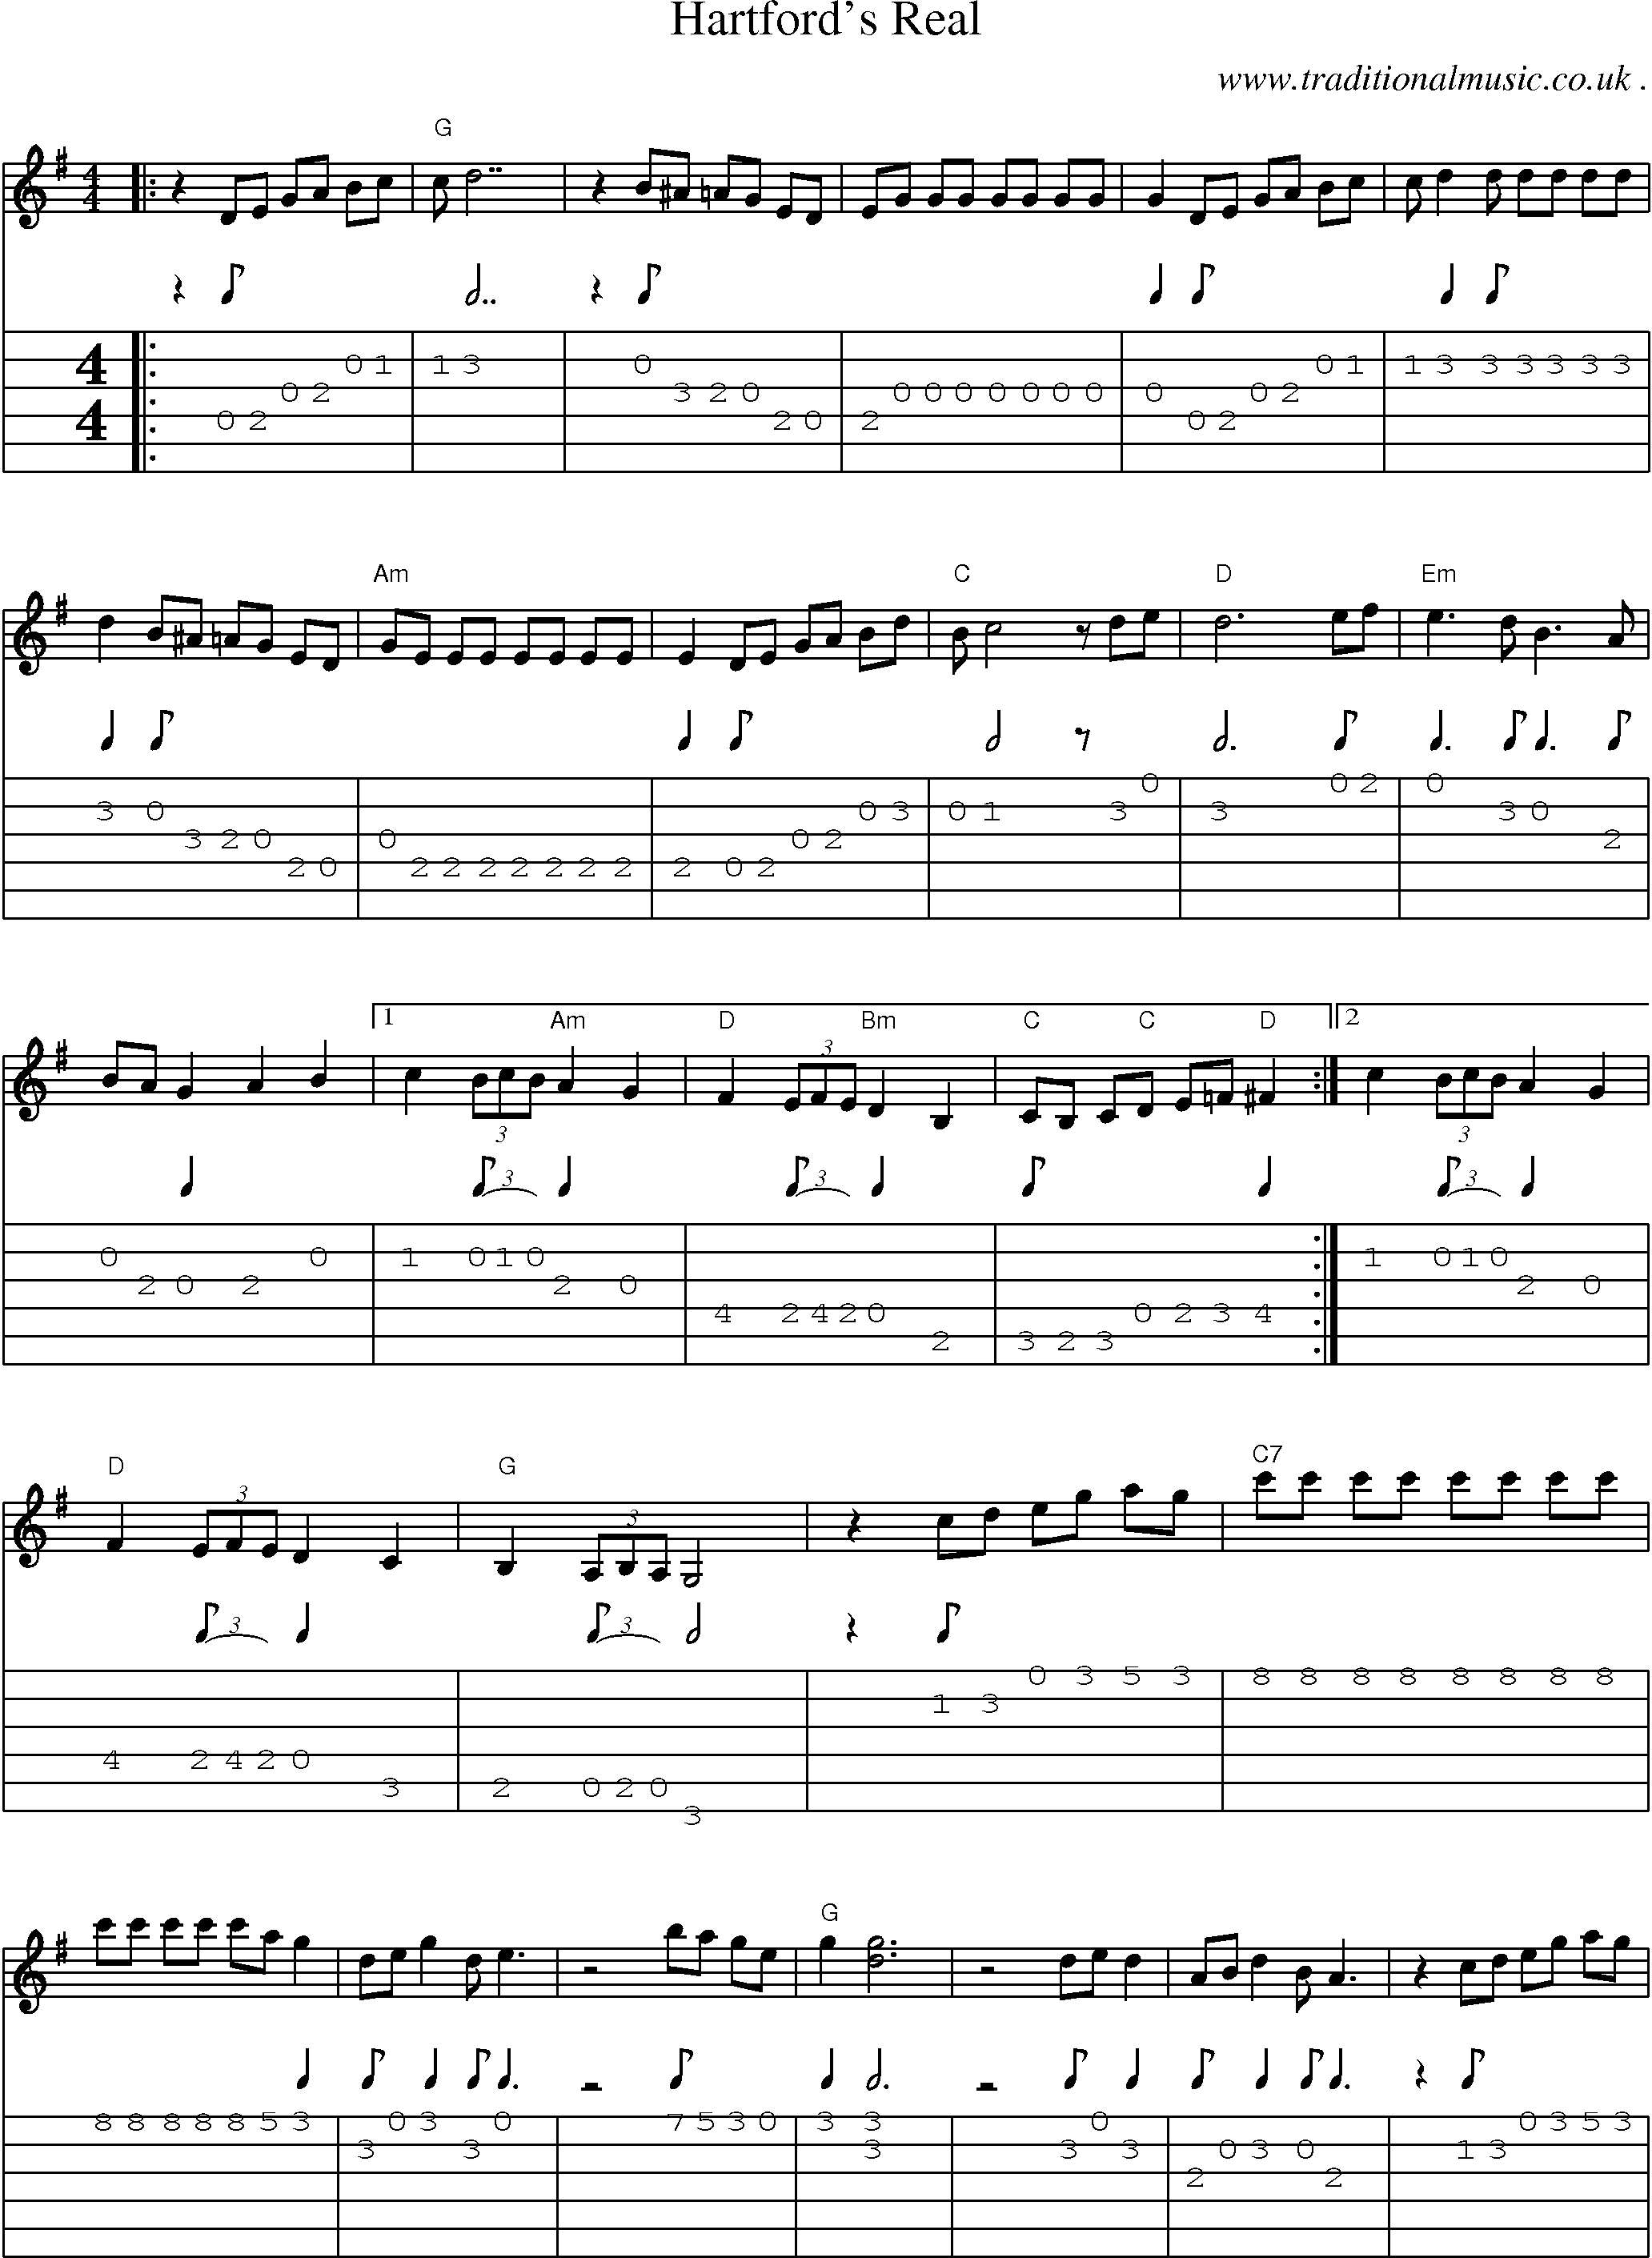 Music Score and Guitar Tabs for Hartfords Real